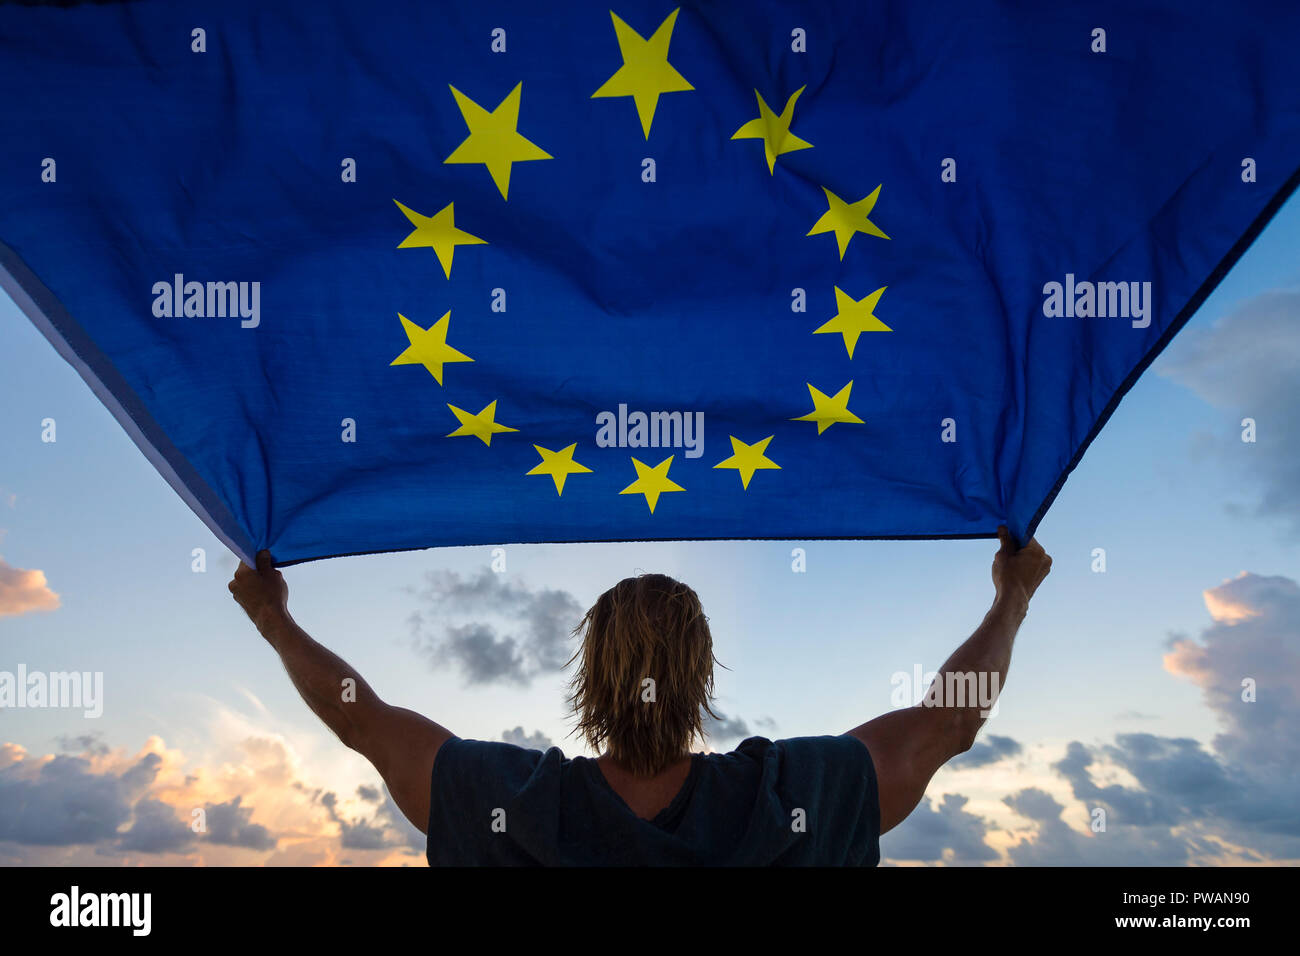 Silhouette of person holding European Union flag against soft sunset sky Stock Photo